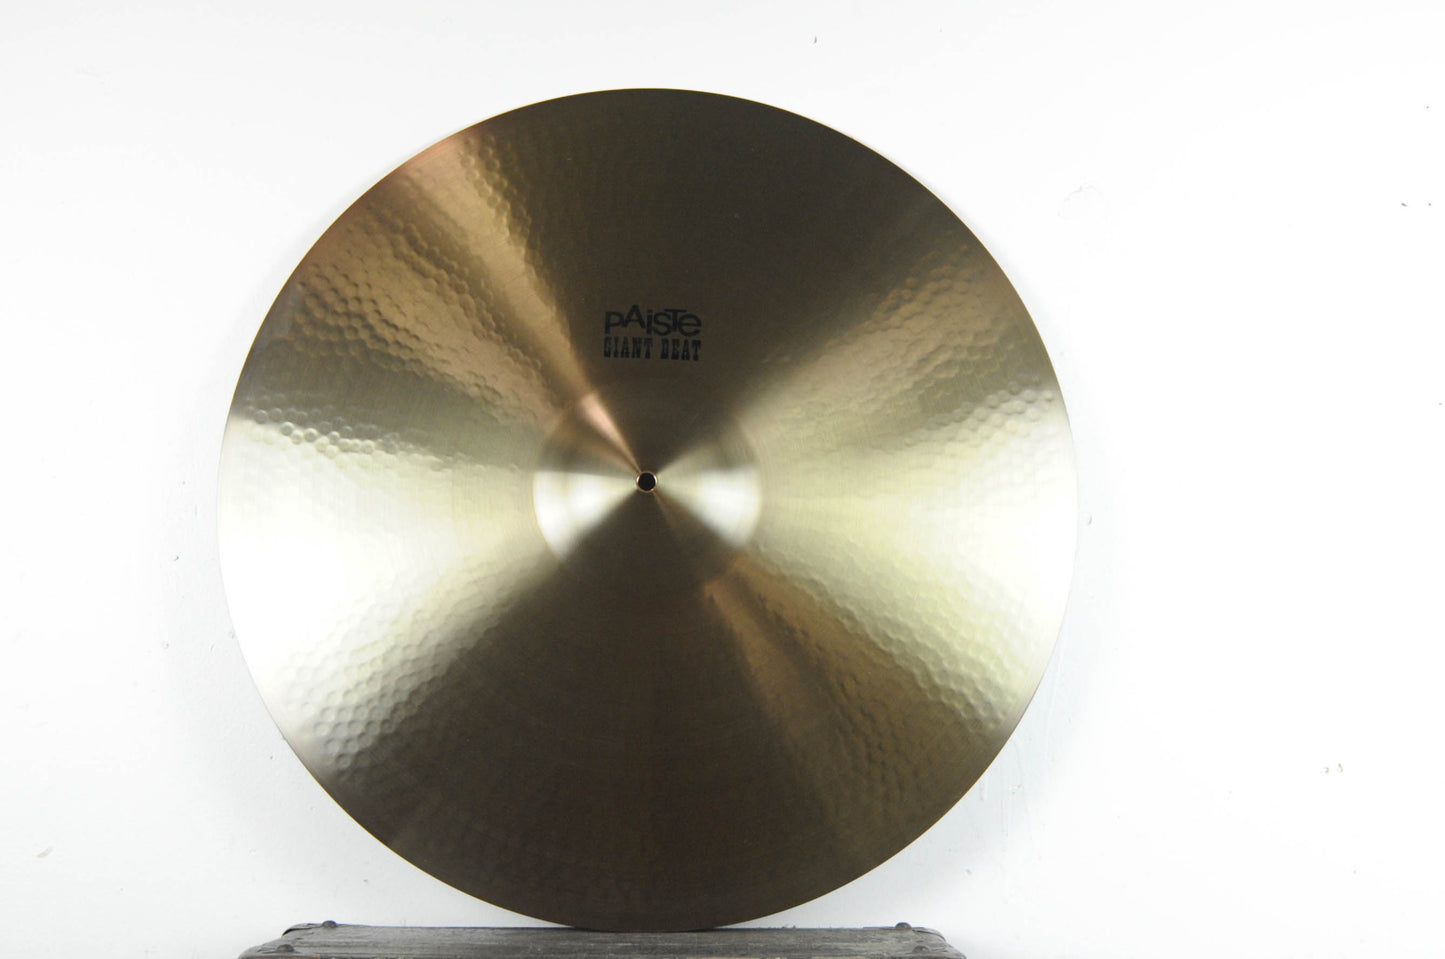 Paiste 24" Giant Beat Multi-Functional Cymbal 2891g